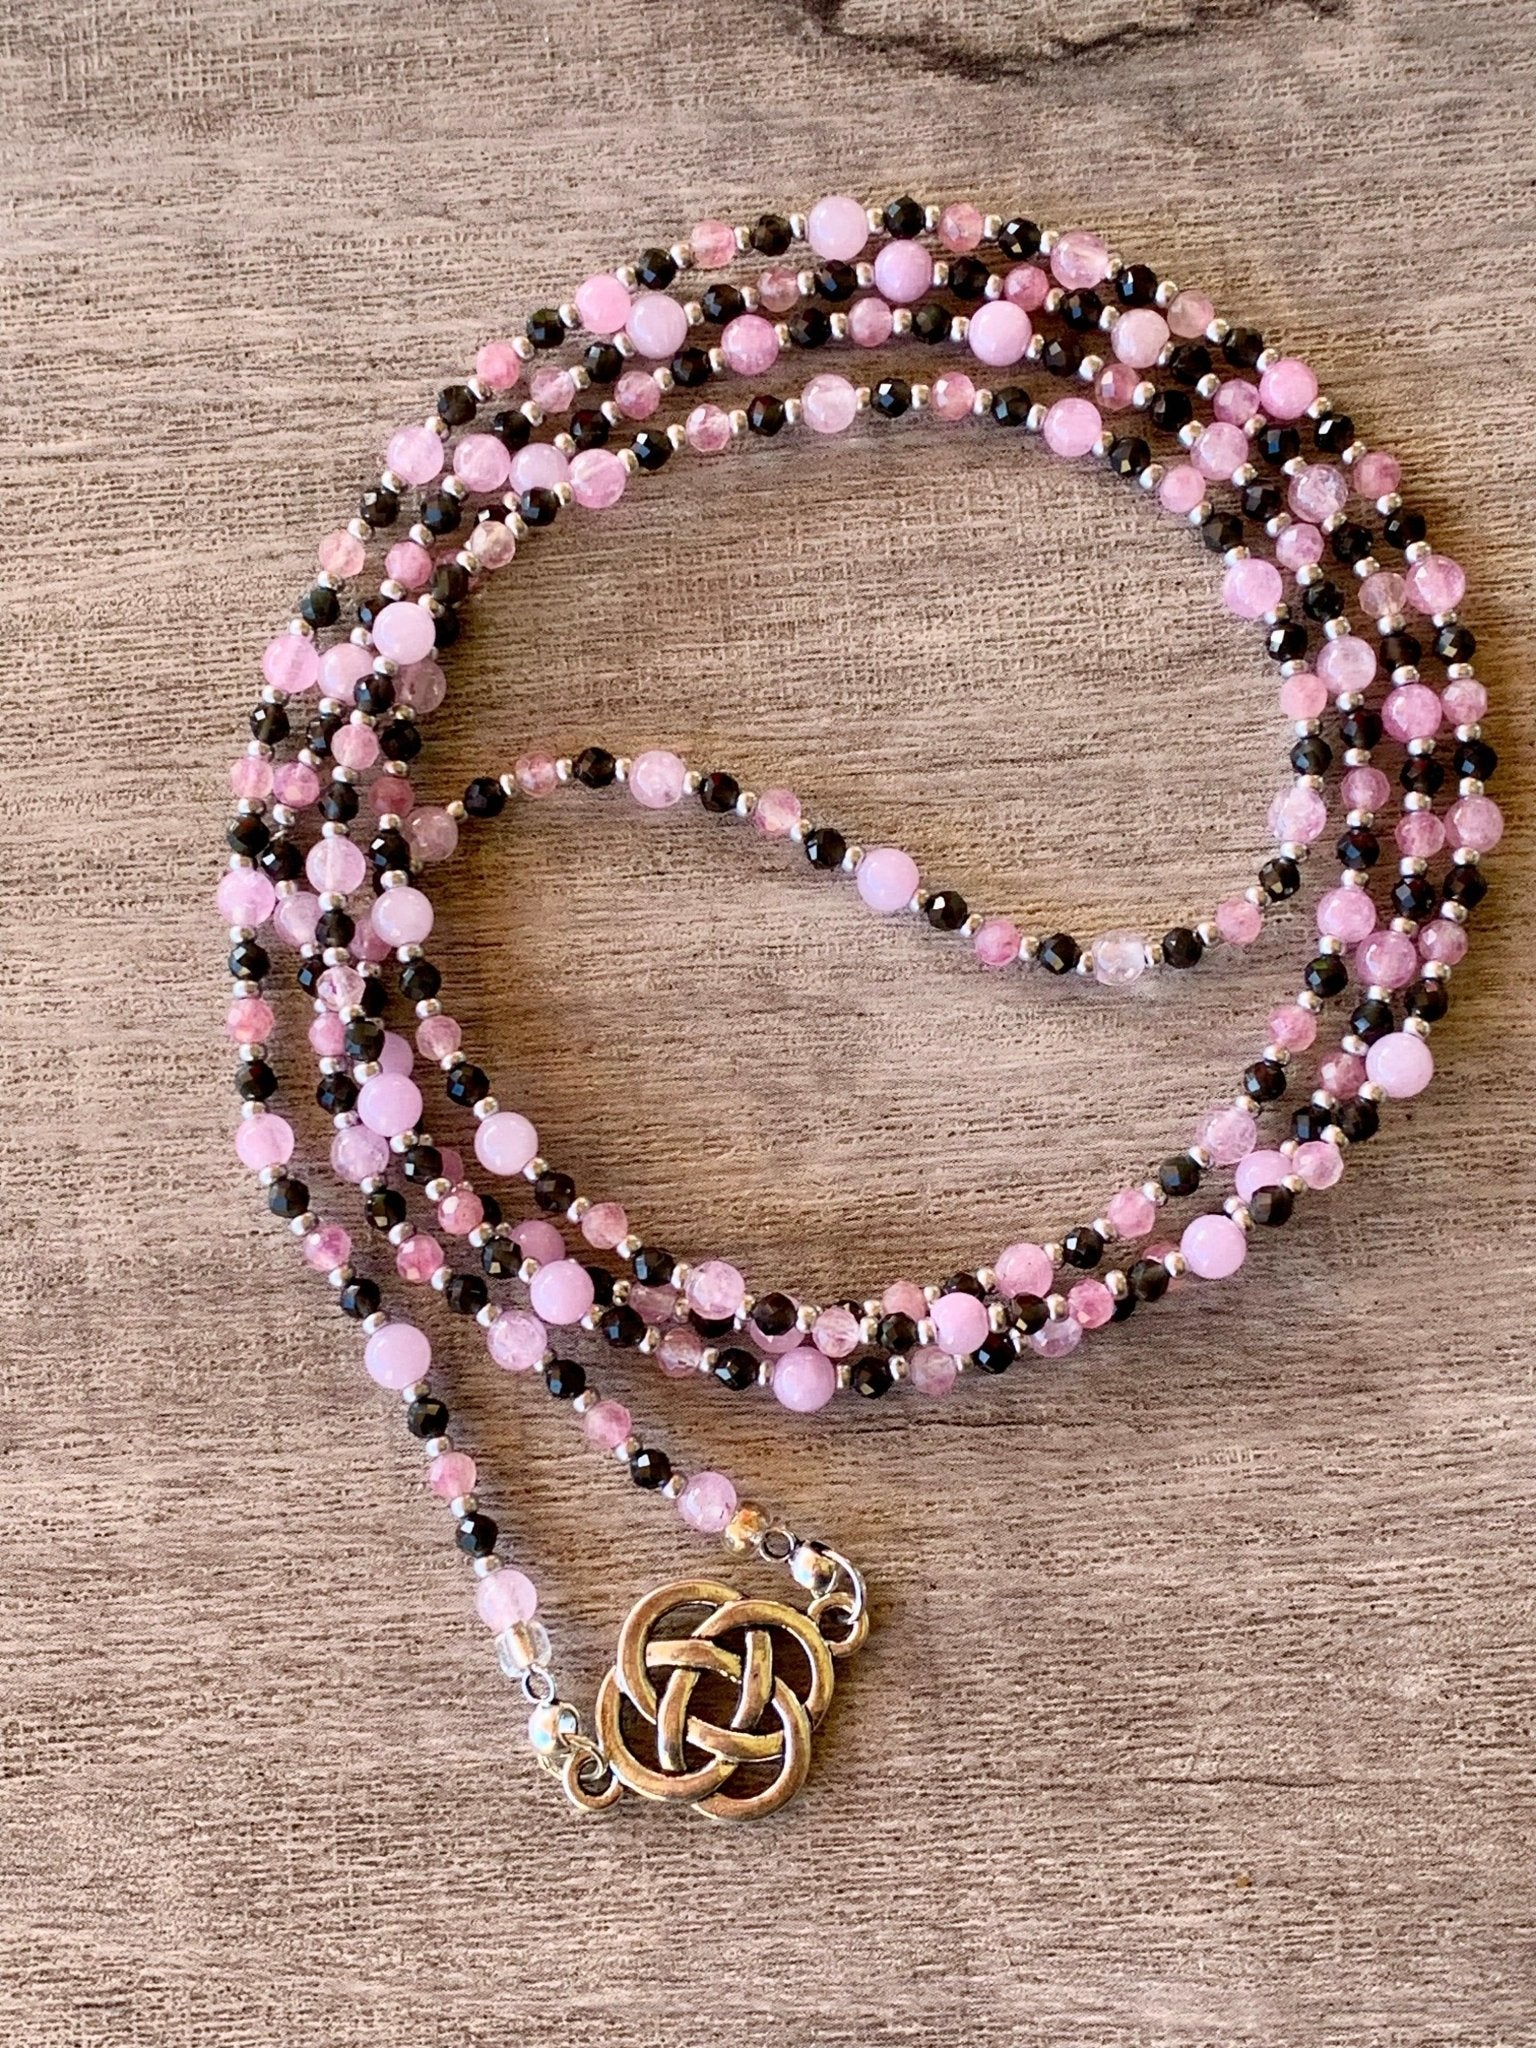 Giselle Handmade Pink Angelite, Pink Tourmaline, and Obsidian 42" Beaded Necklace - Born Mystics